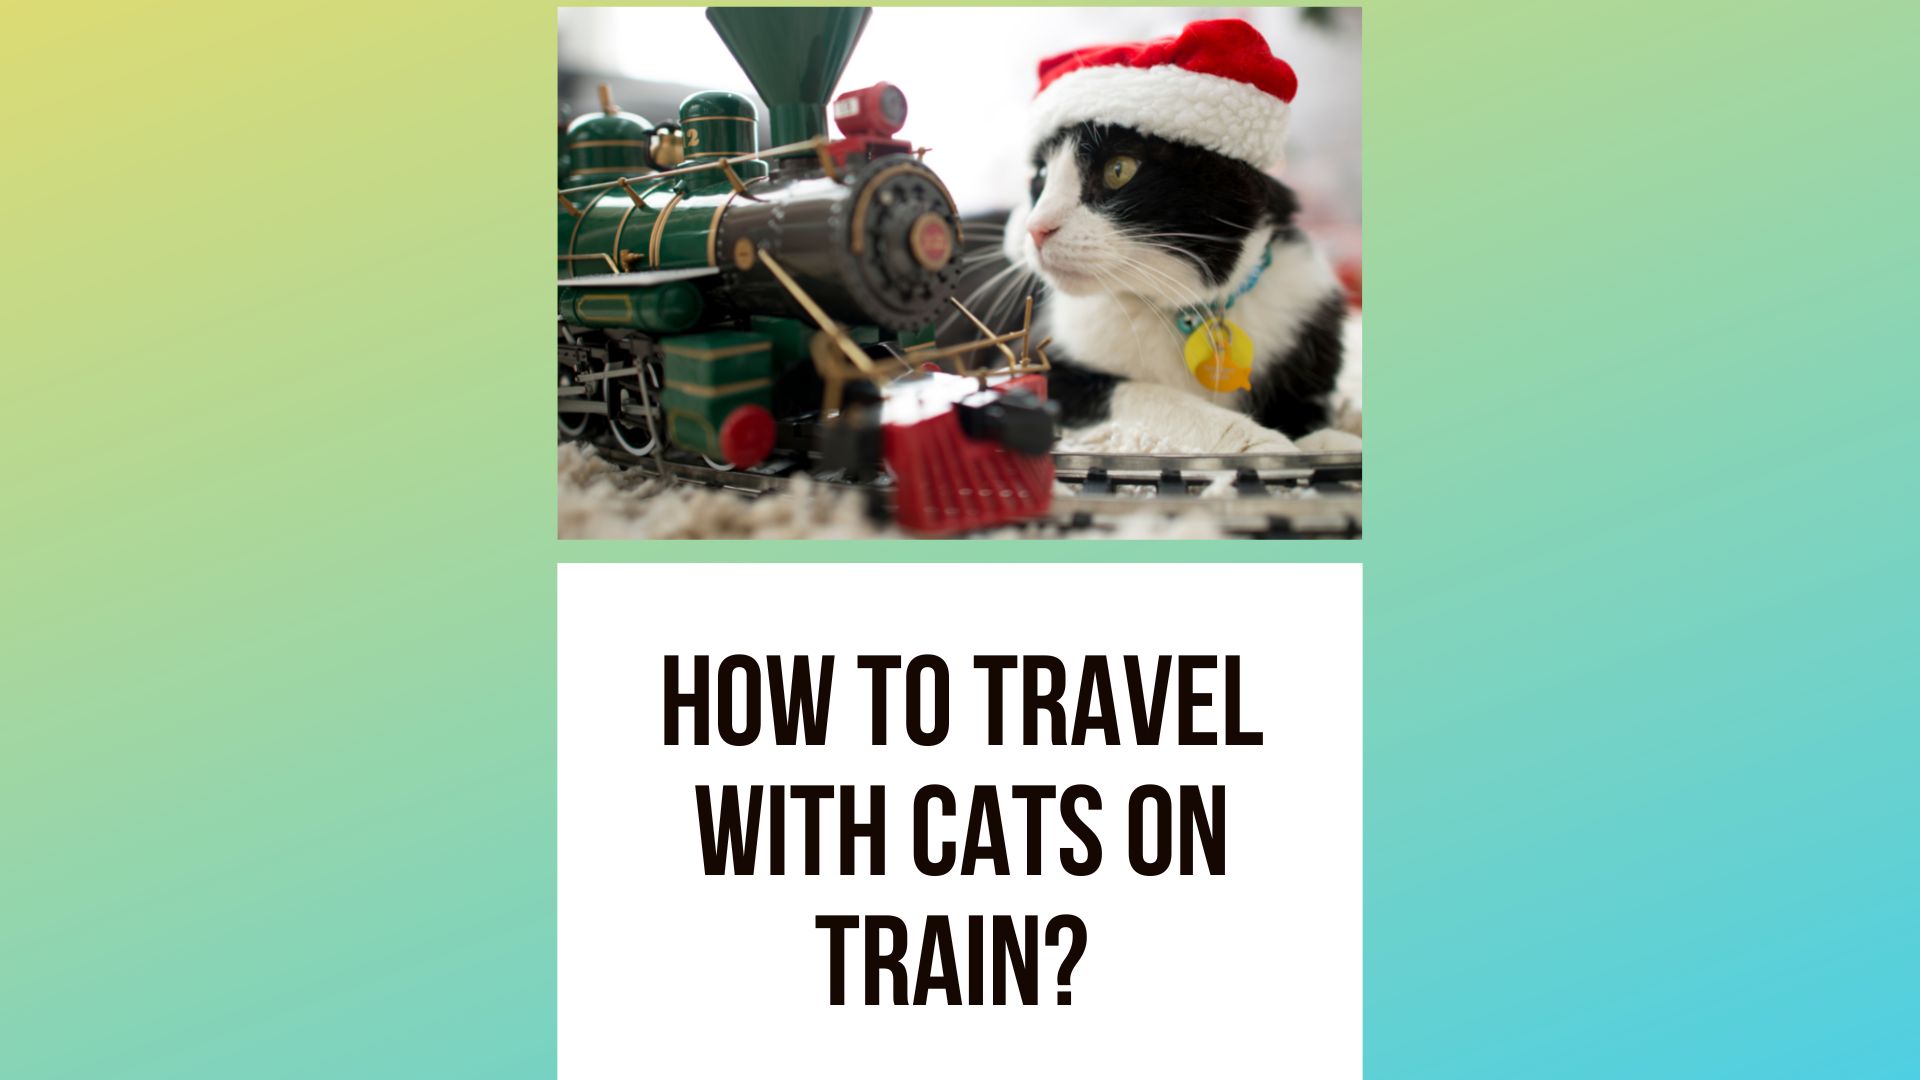 How to Travel With Cats on Train